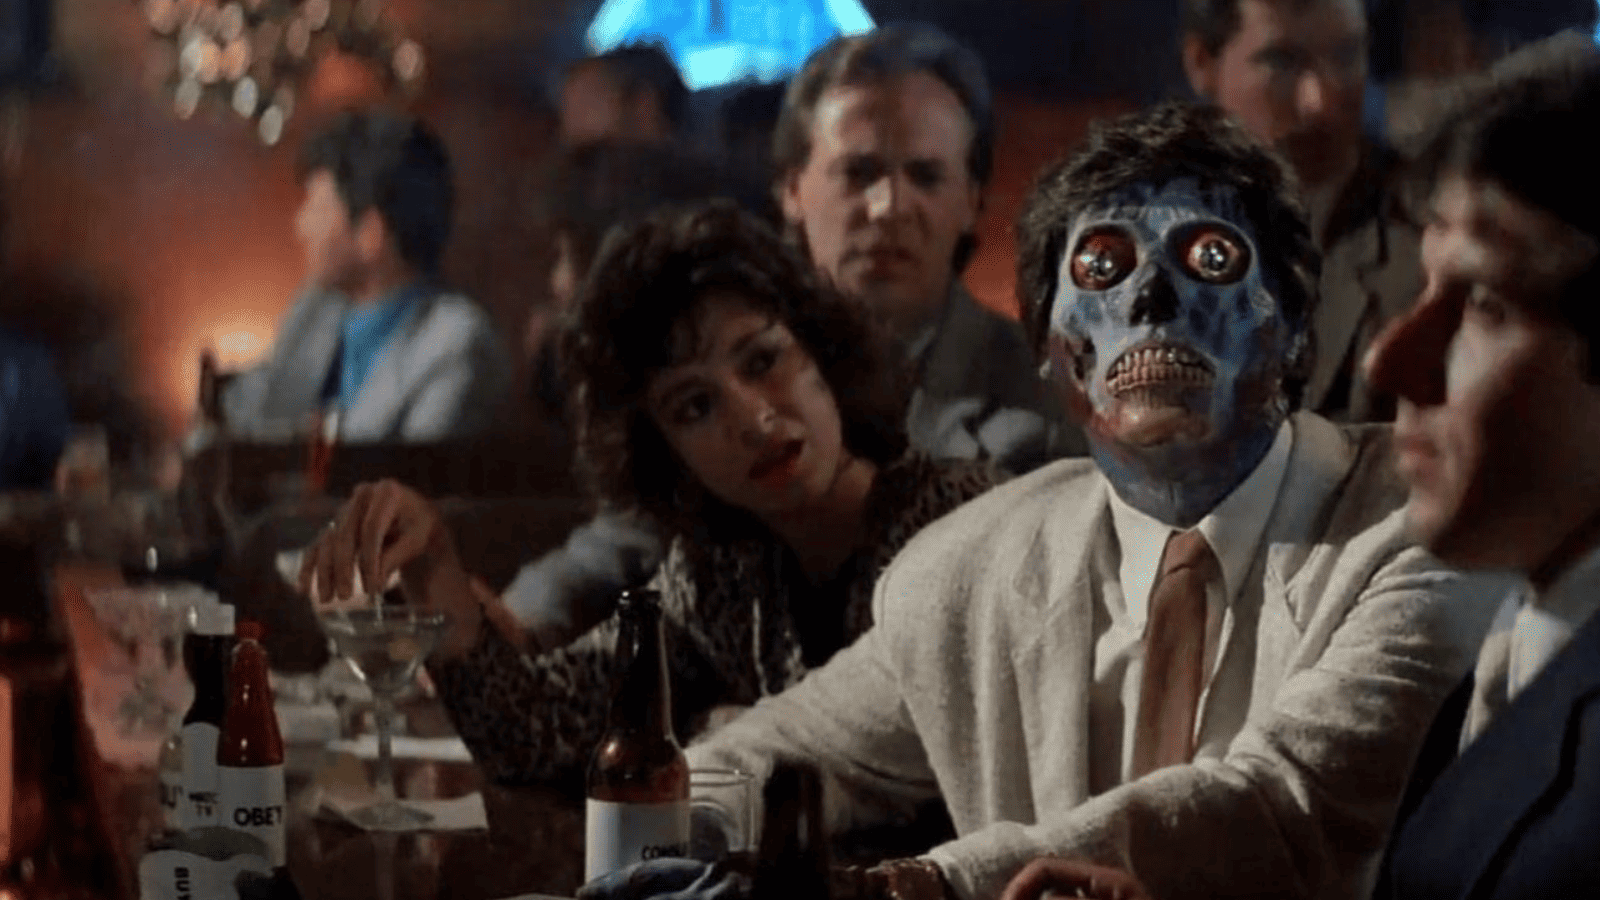 Scene from They Live